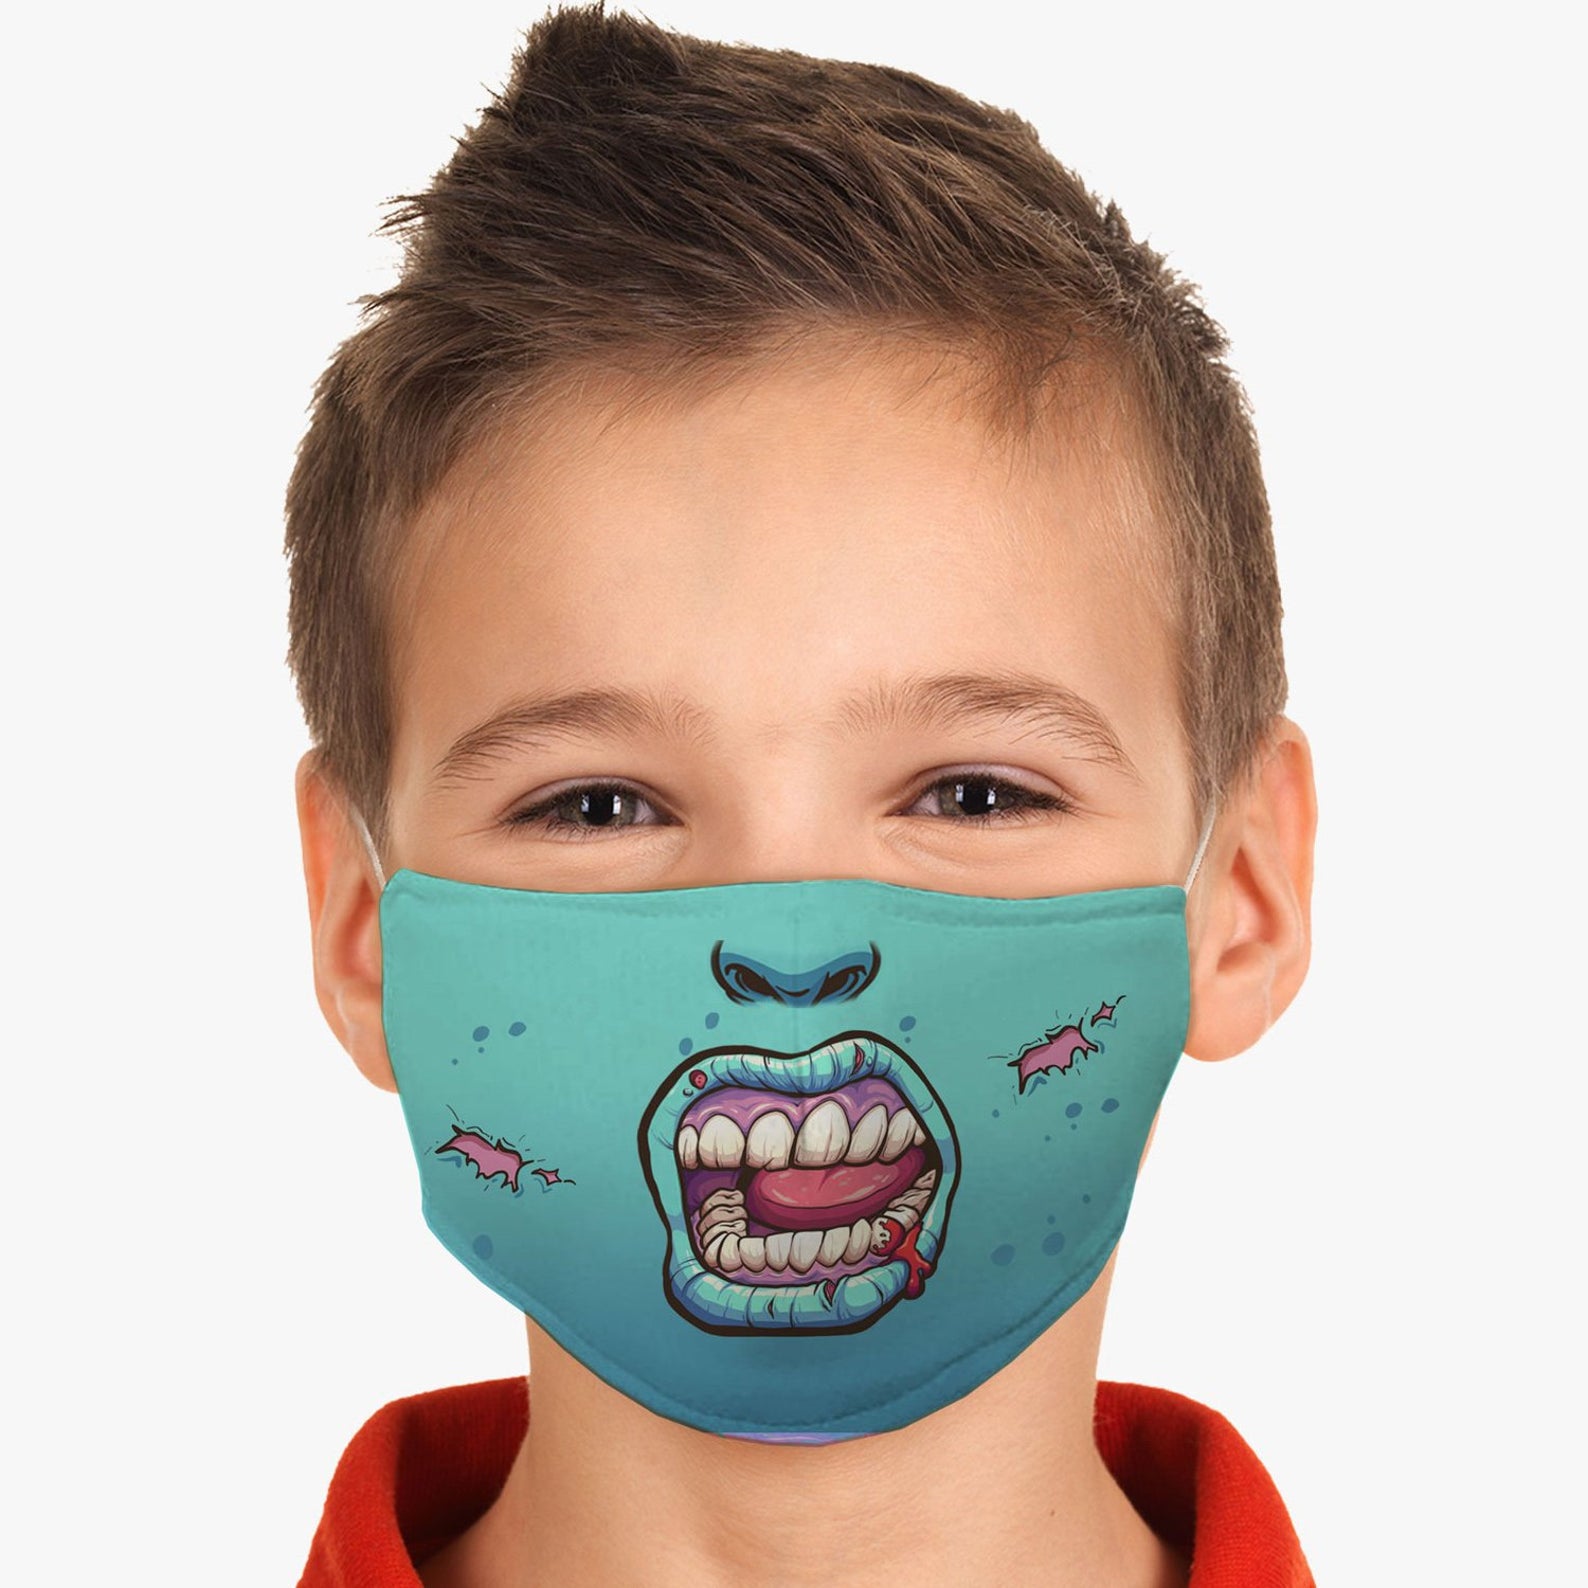 Halloween face masks for kids: Zombie Halloween mask | Visionary Creation Co.